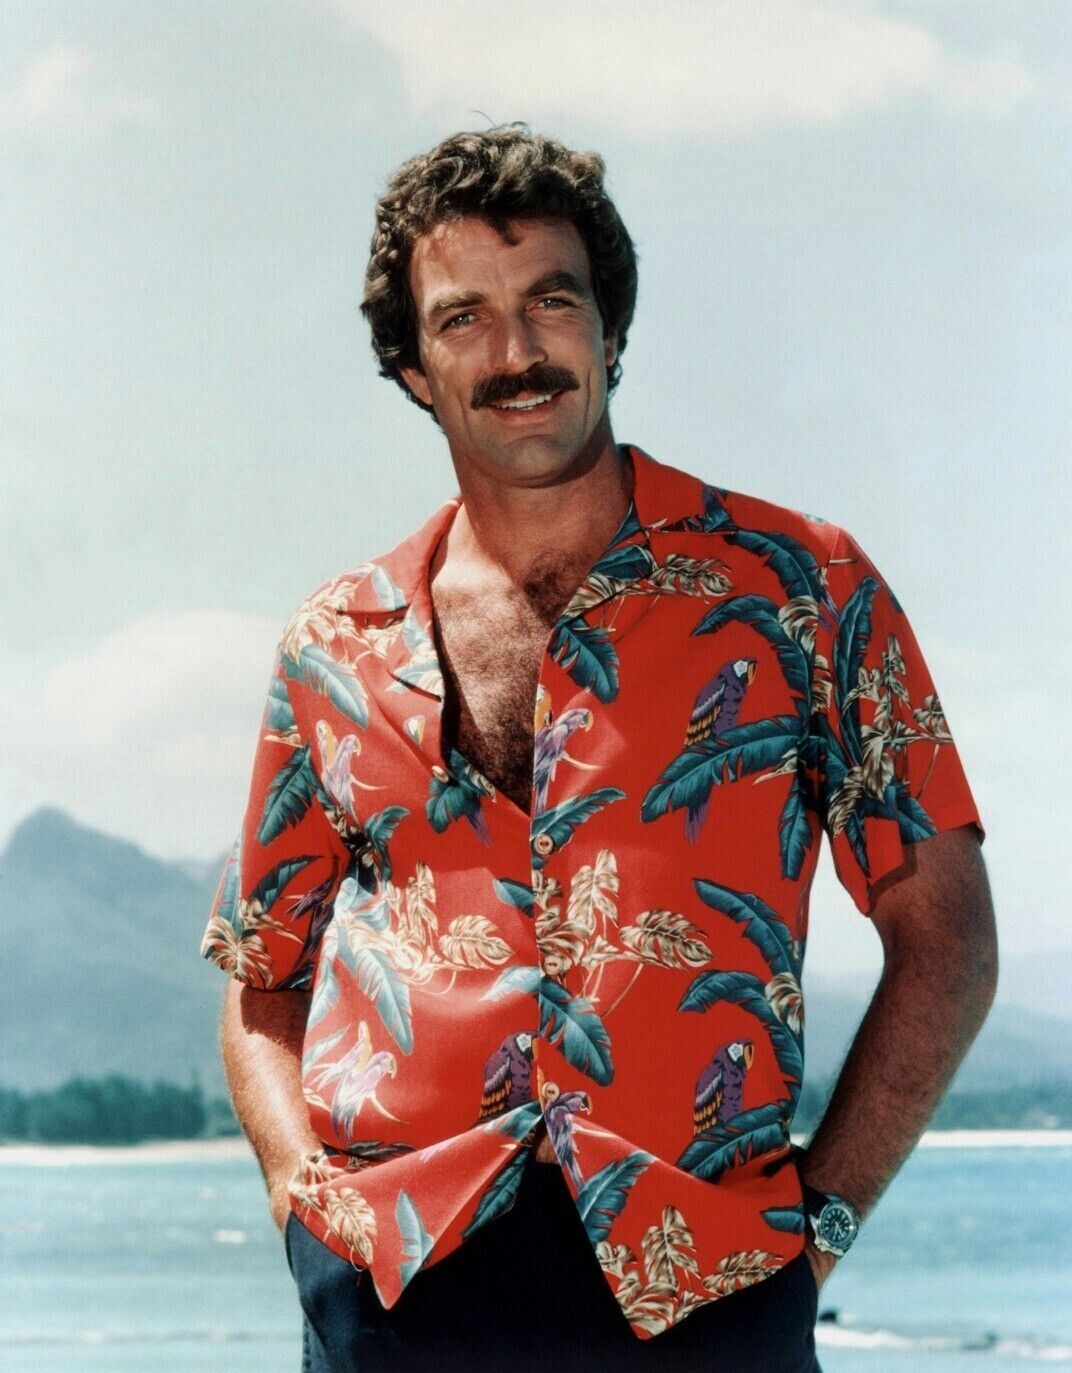 Actor Tom Selleck in TV Show Magnum P.I. Publicity Picture Poster Photo 11x17